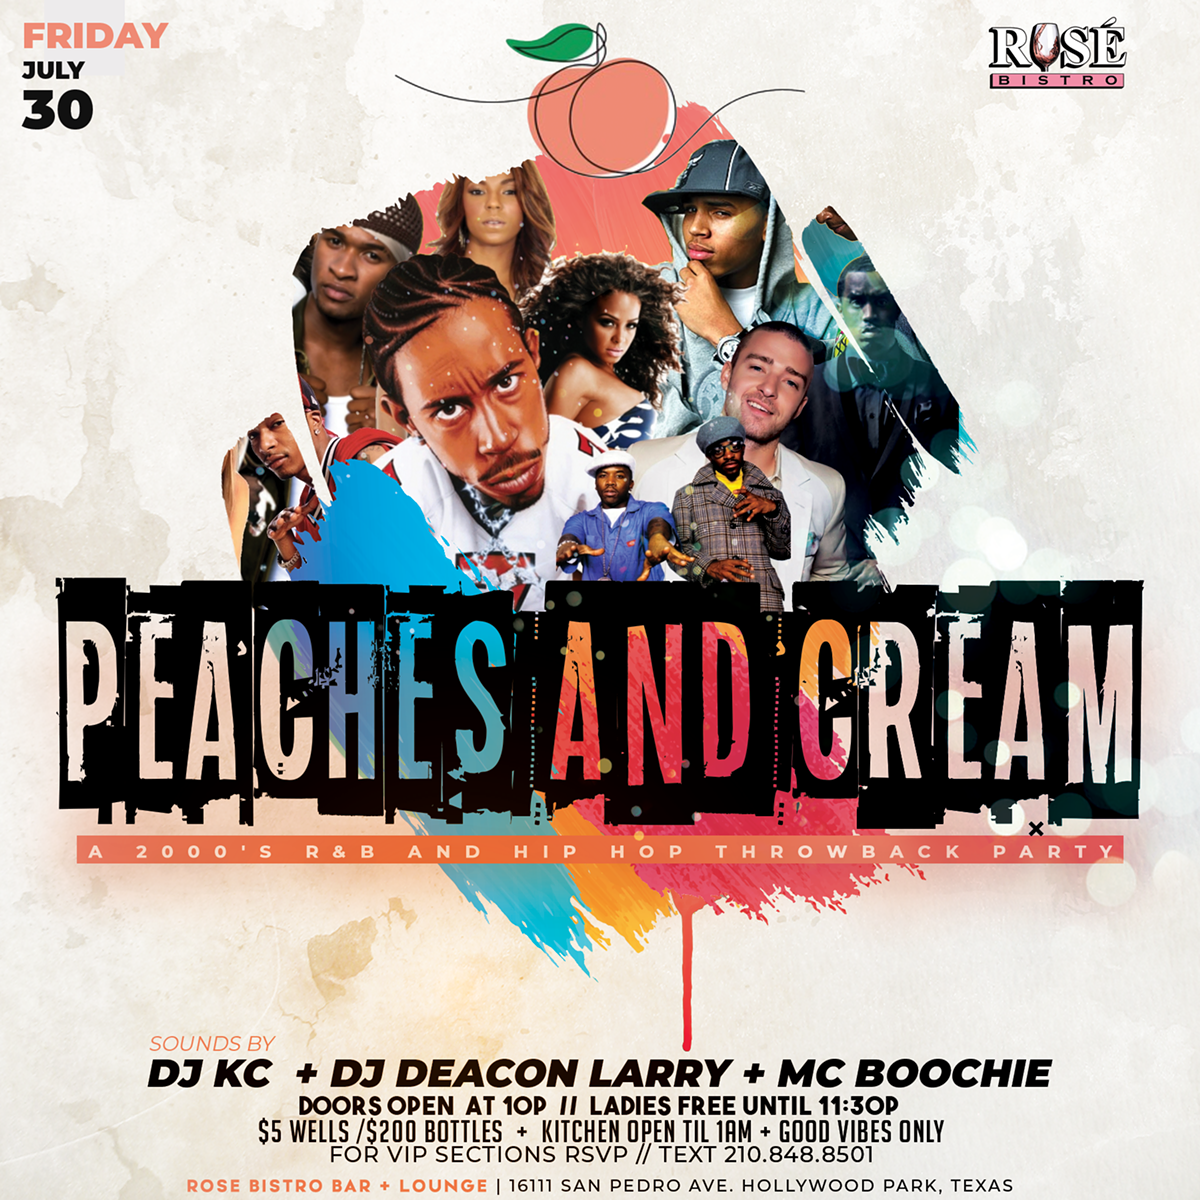 Come out to Rosé Bistro Friday Night for "Peaches and Cream" A Salute to 2000's R&B and Hip-Hop Music